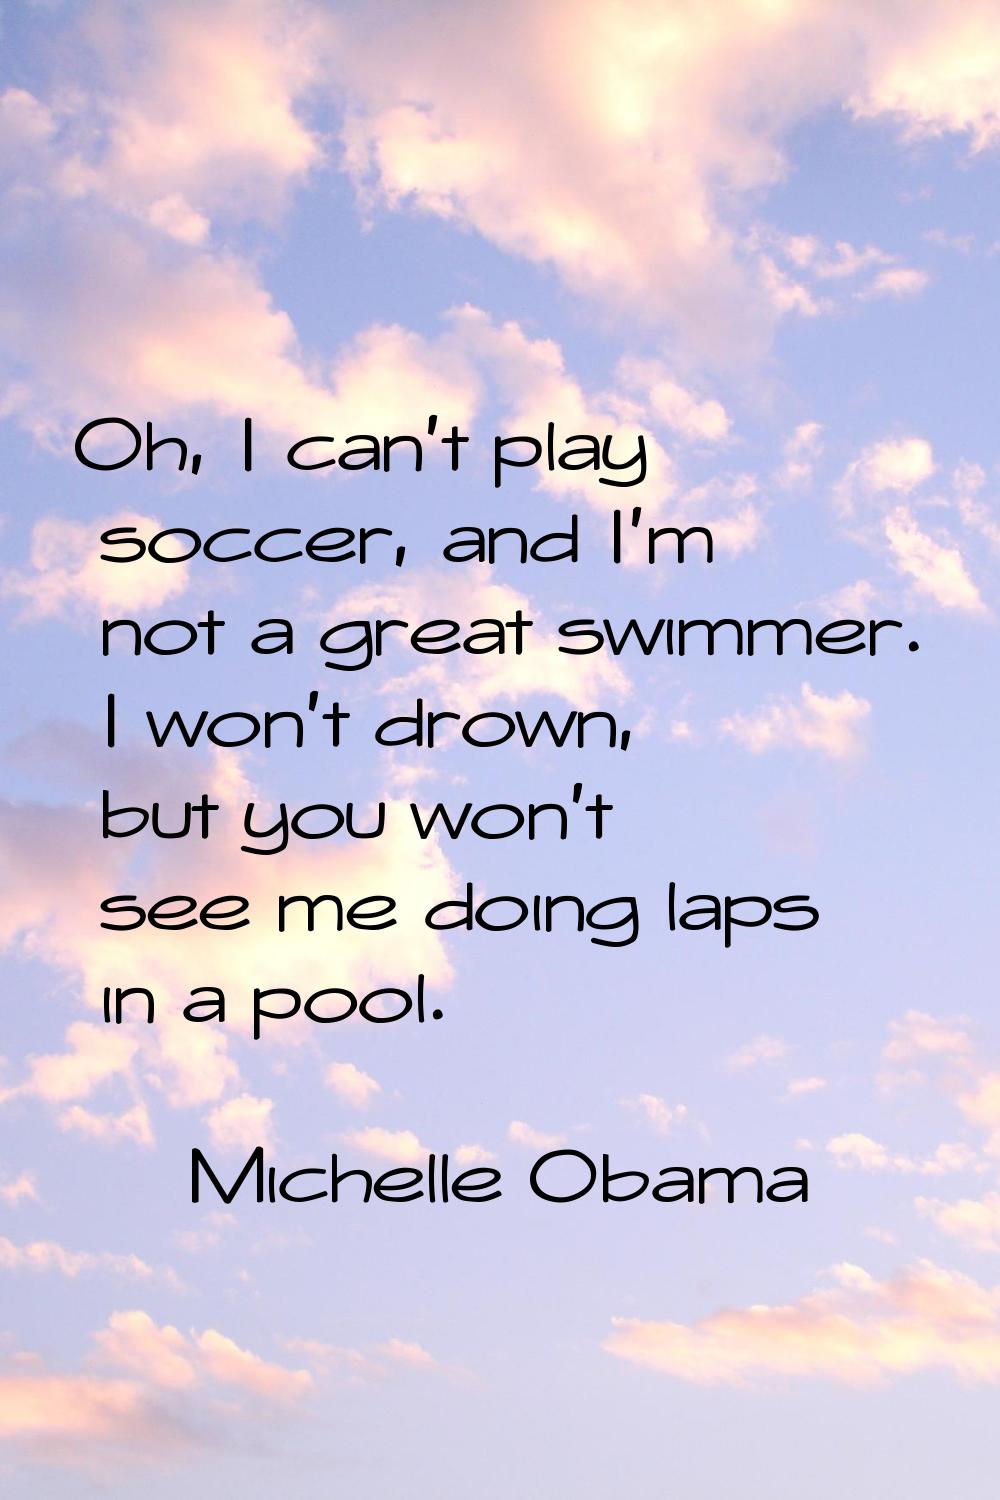 Oh, I can't play soccer, and I'm not a great swimmer. I won't drown, but you won't see me doing lap